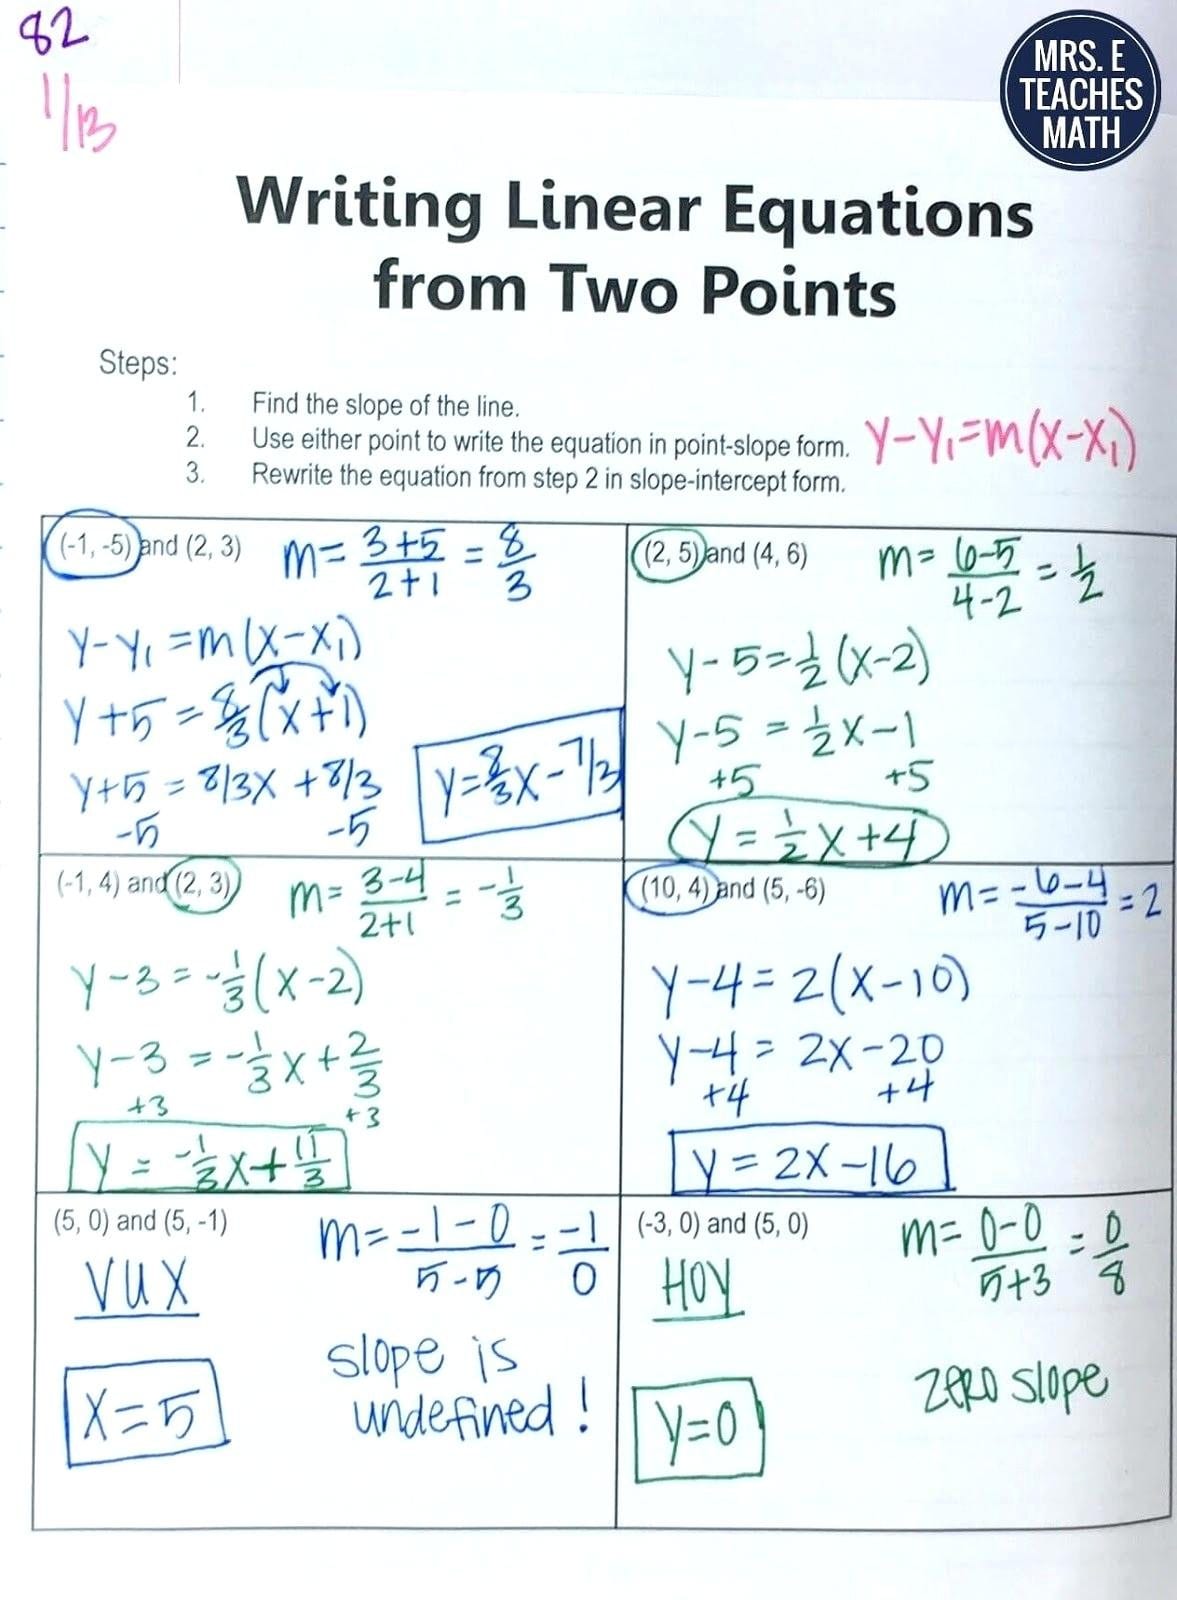 Standard Form Linear Quation Slope In Math Intercept Together With Mrs E Teaches Math Worksheet Answers